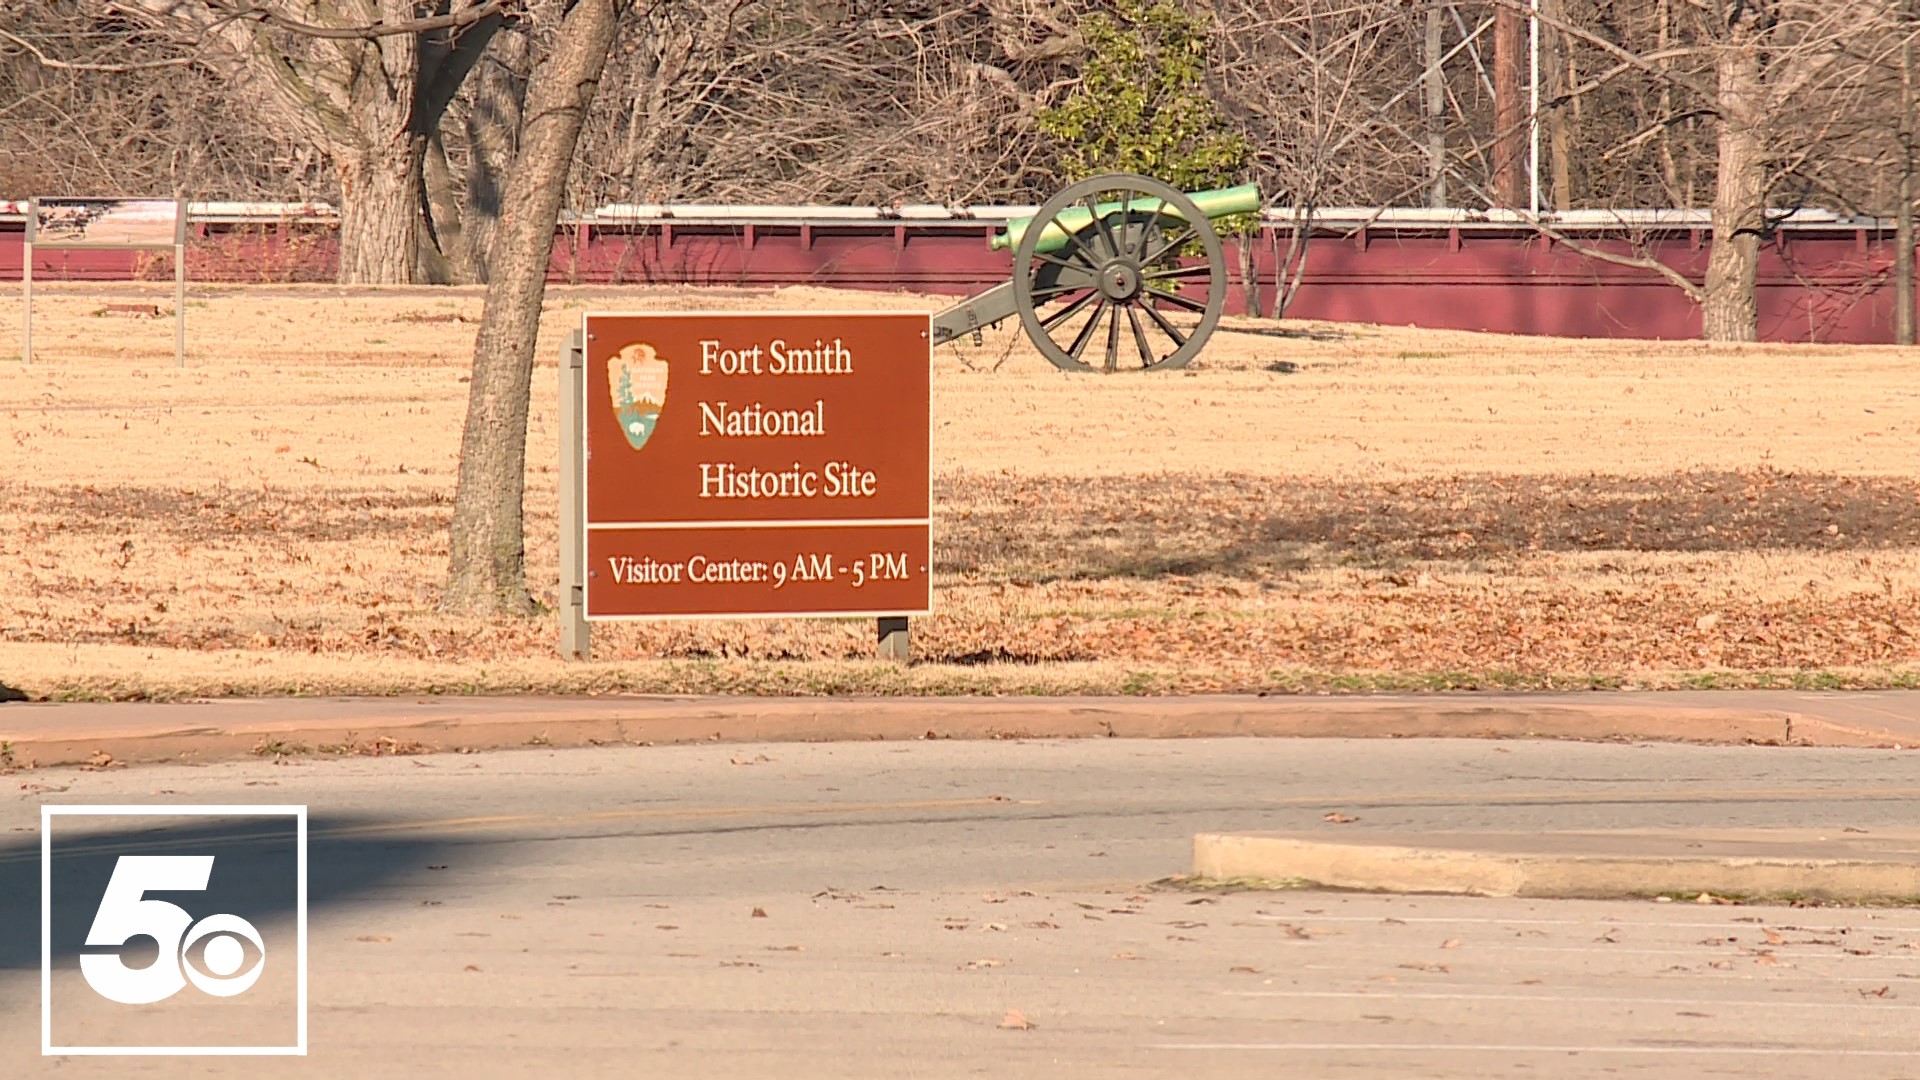 Fort Smith National Historic Site Supervisory Park Ranger Nissa Mondahl joins 5NEWS Anchor Daren Bobb to discuss the park's museum and visitors center reopening.